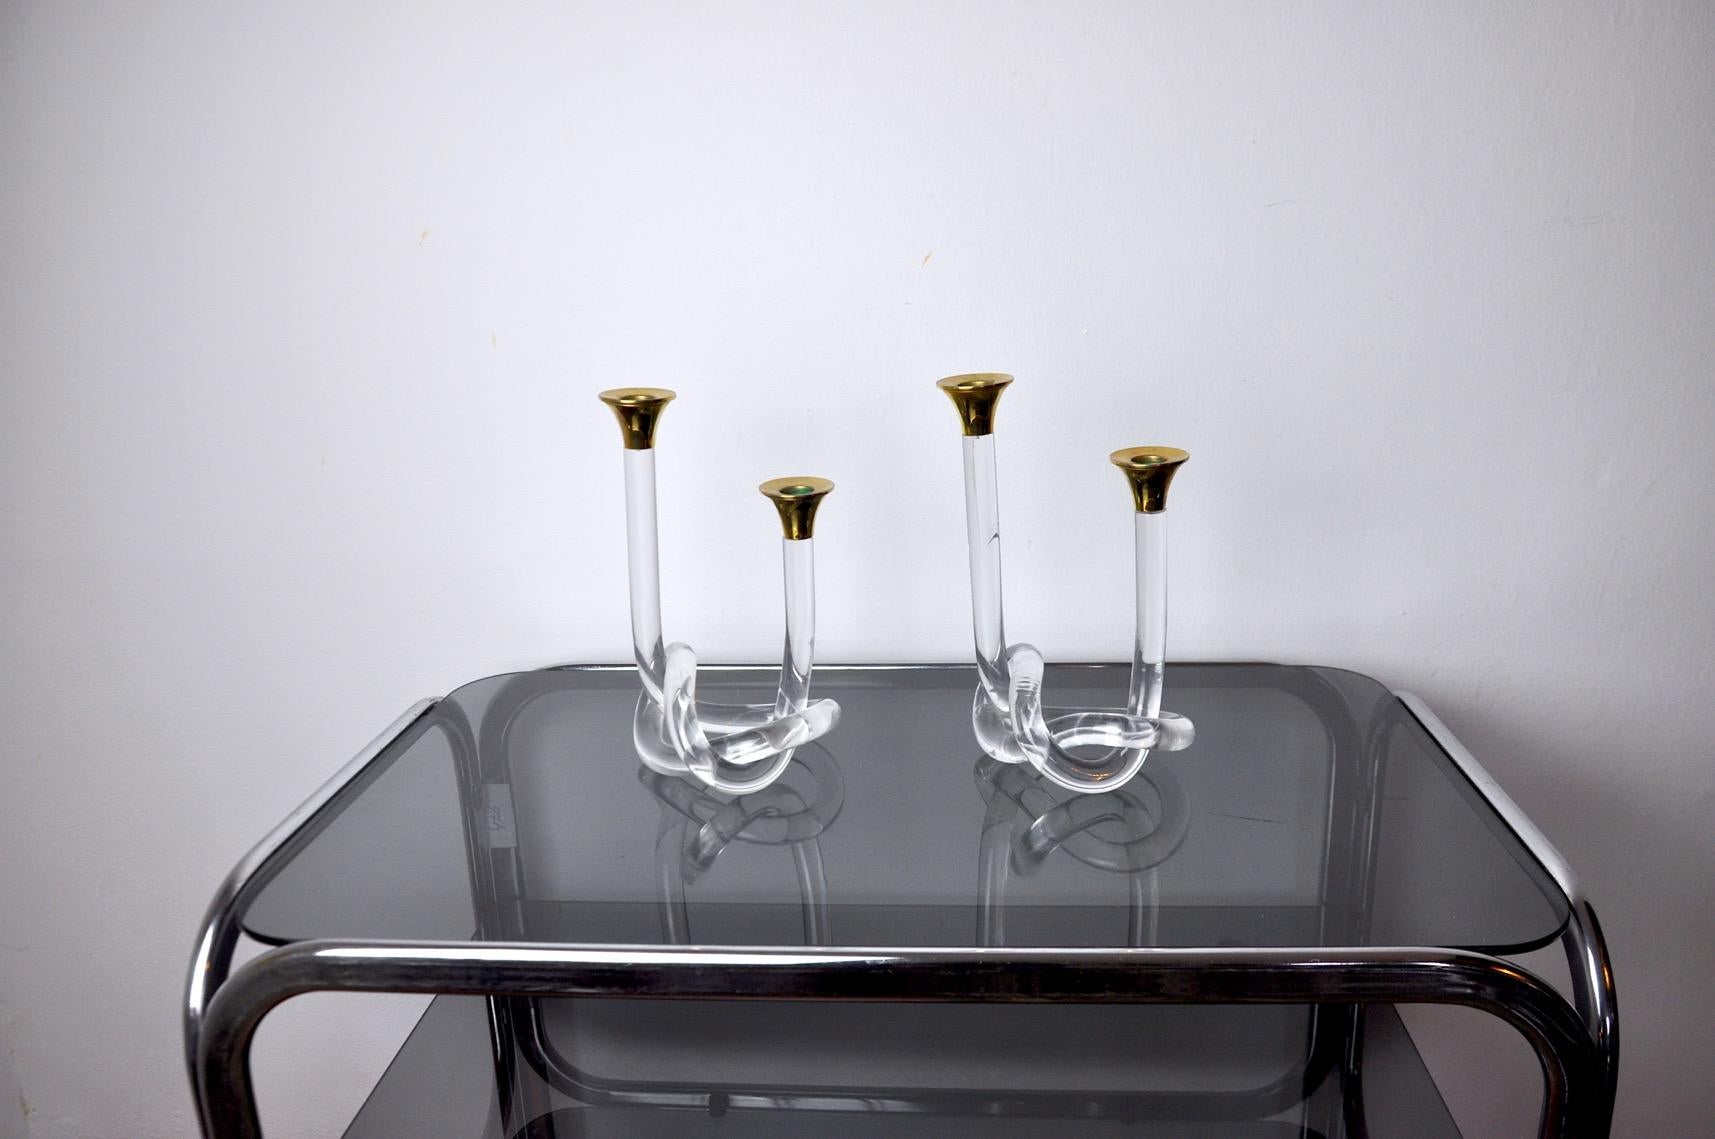 Beautiful pair of Lucite Dorothy Thorpe candle holders designed and produced in the 1970's. Pretzel shaped gold colored brass holder designed by Elaine Bscheider. Superb design and vintage object to decorate your interior. 

 